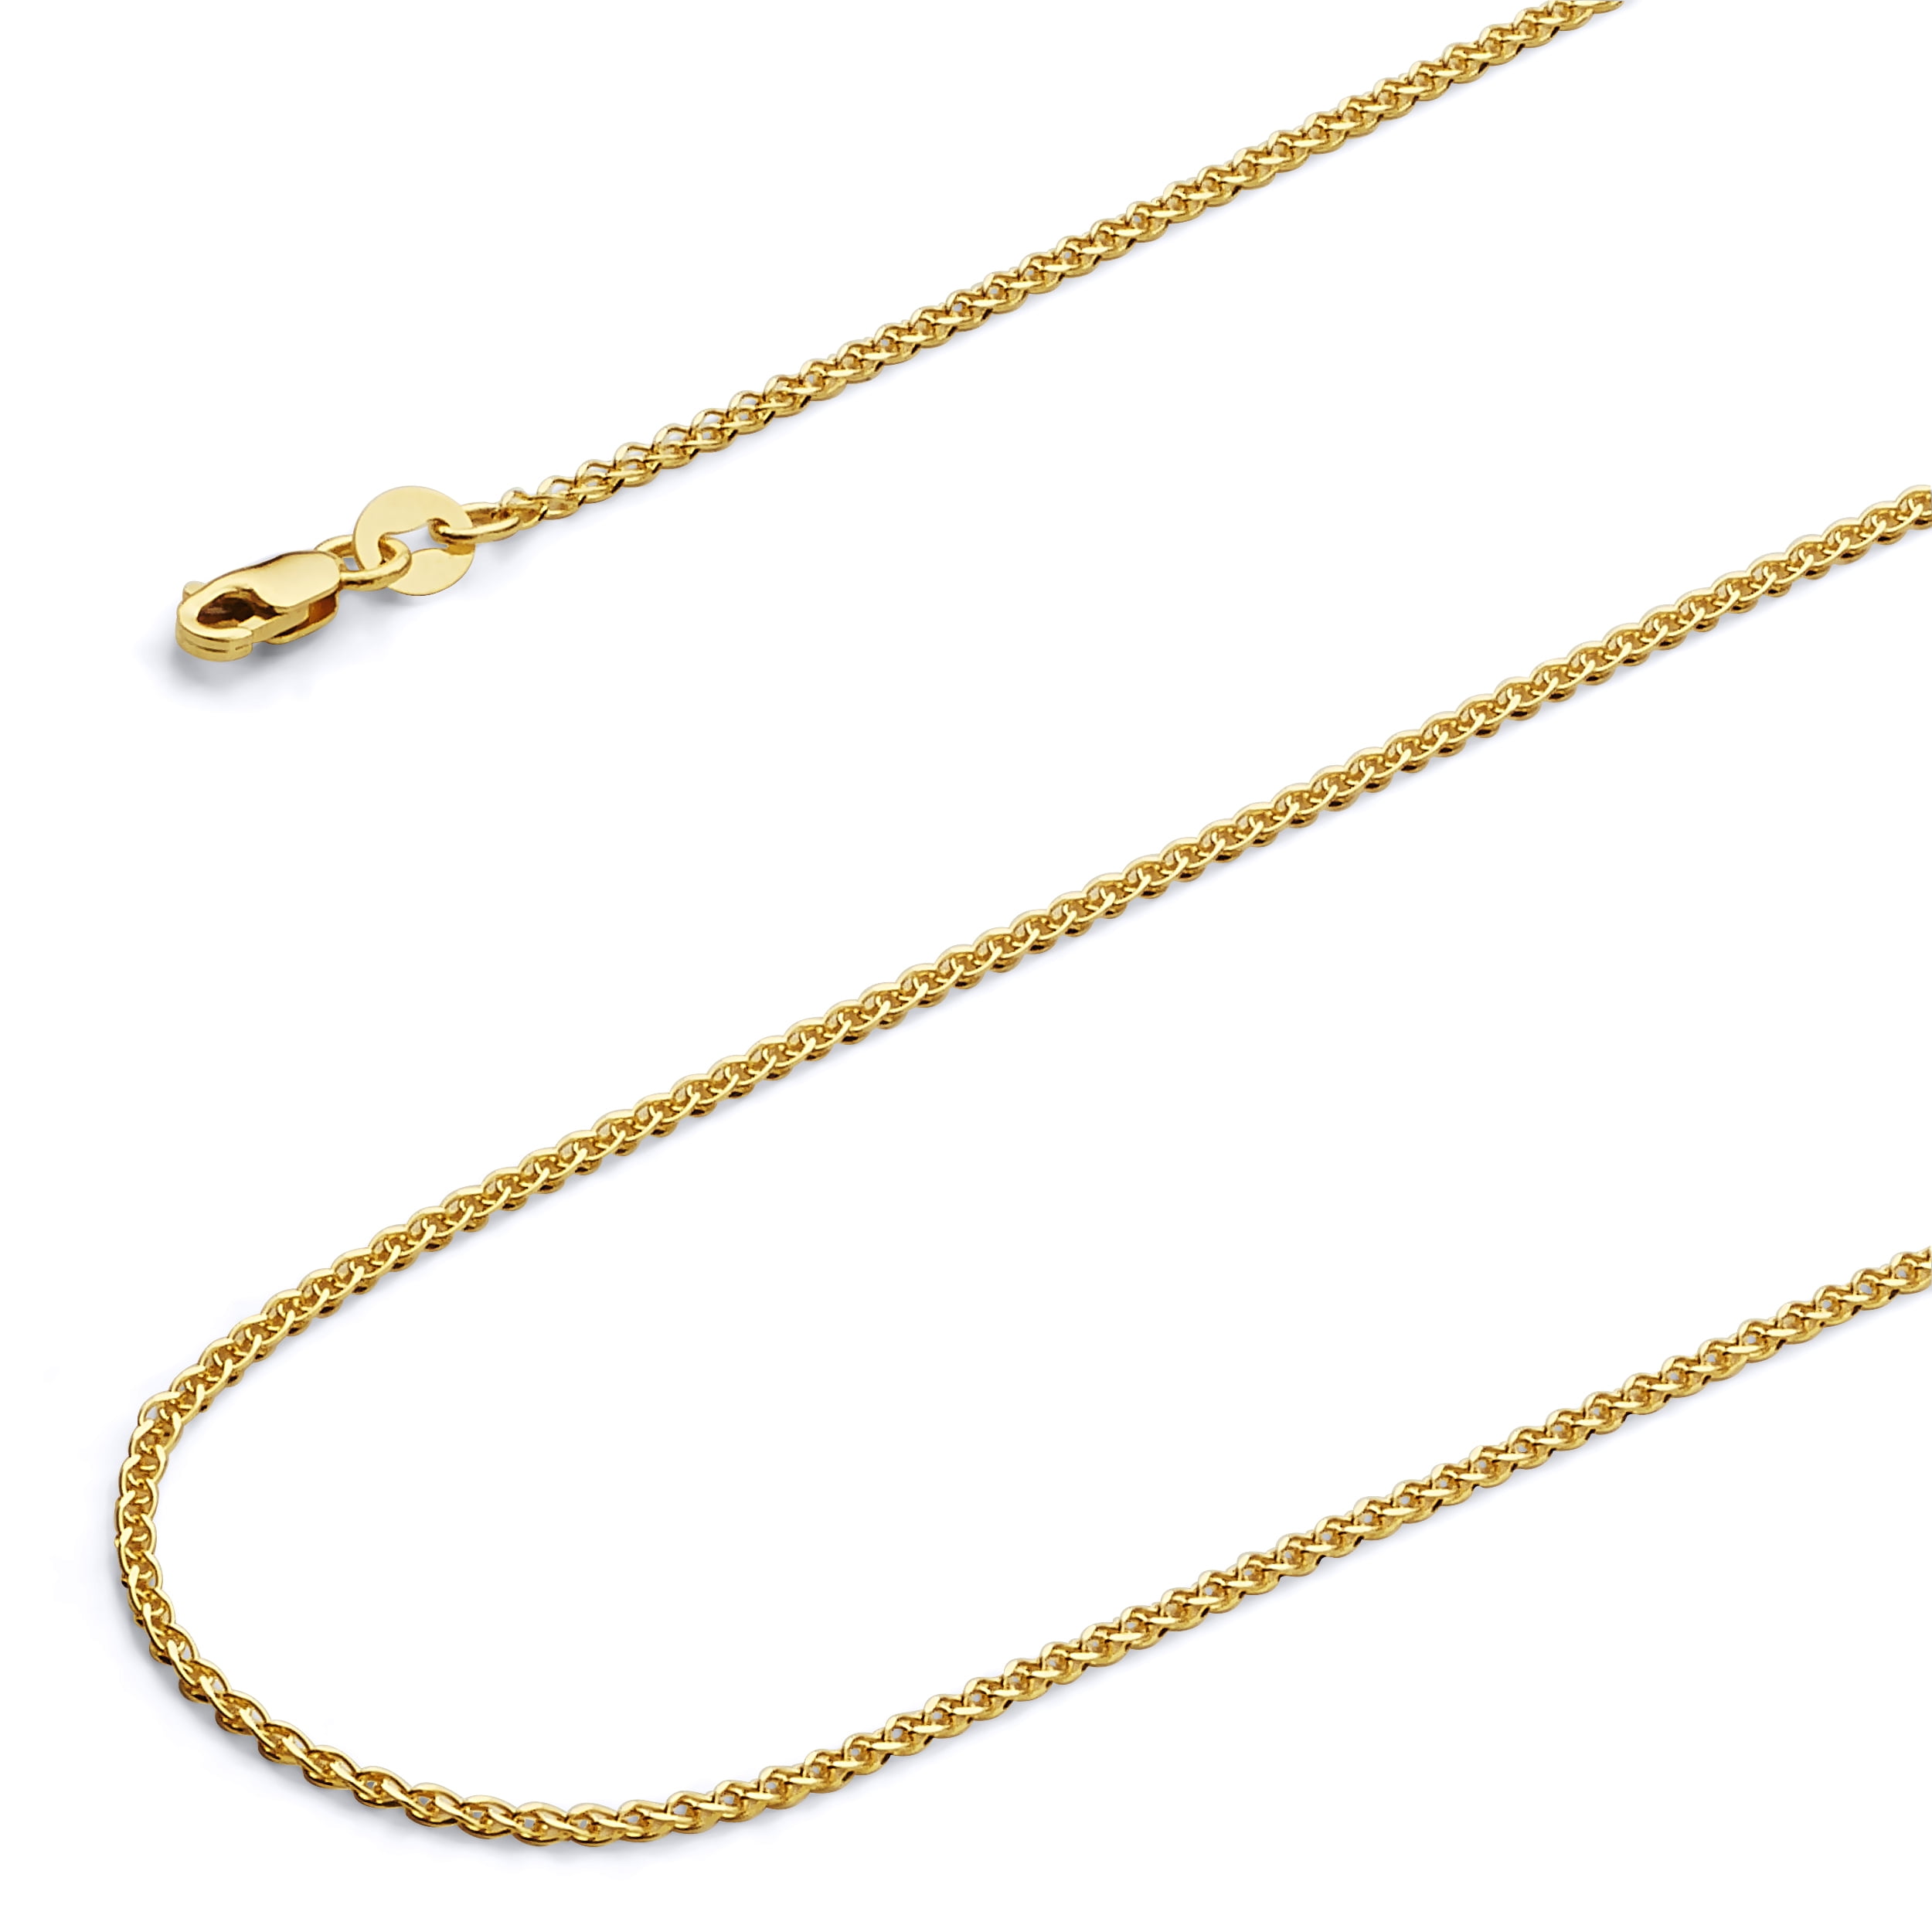 Wellingsale 14k Yellow Gold Polished 1.5mm Heavy Solid Diamond Cut Rope Chain Necklace